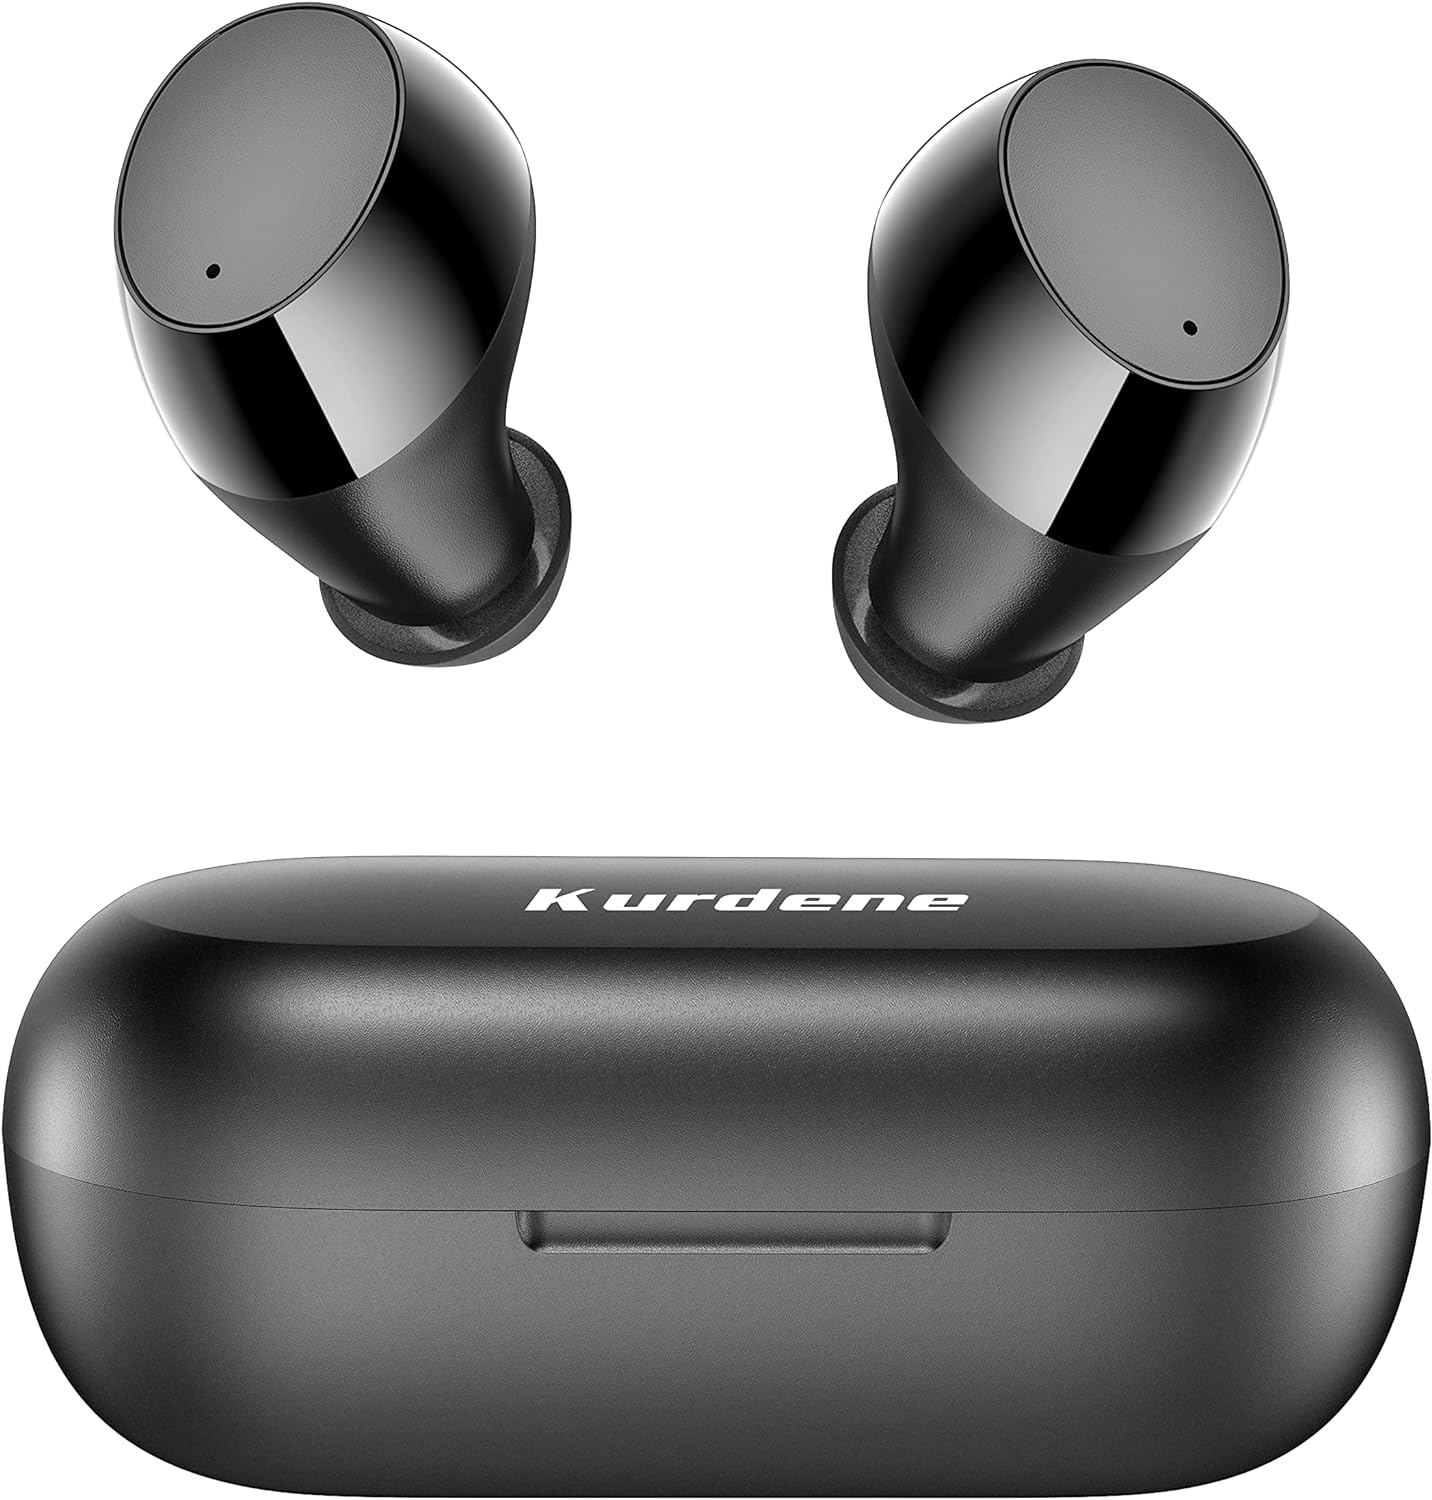 Step-by-Step Guide To Pairing Kurdene Wireless Earbuds